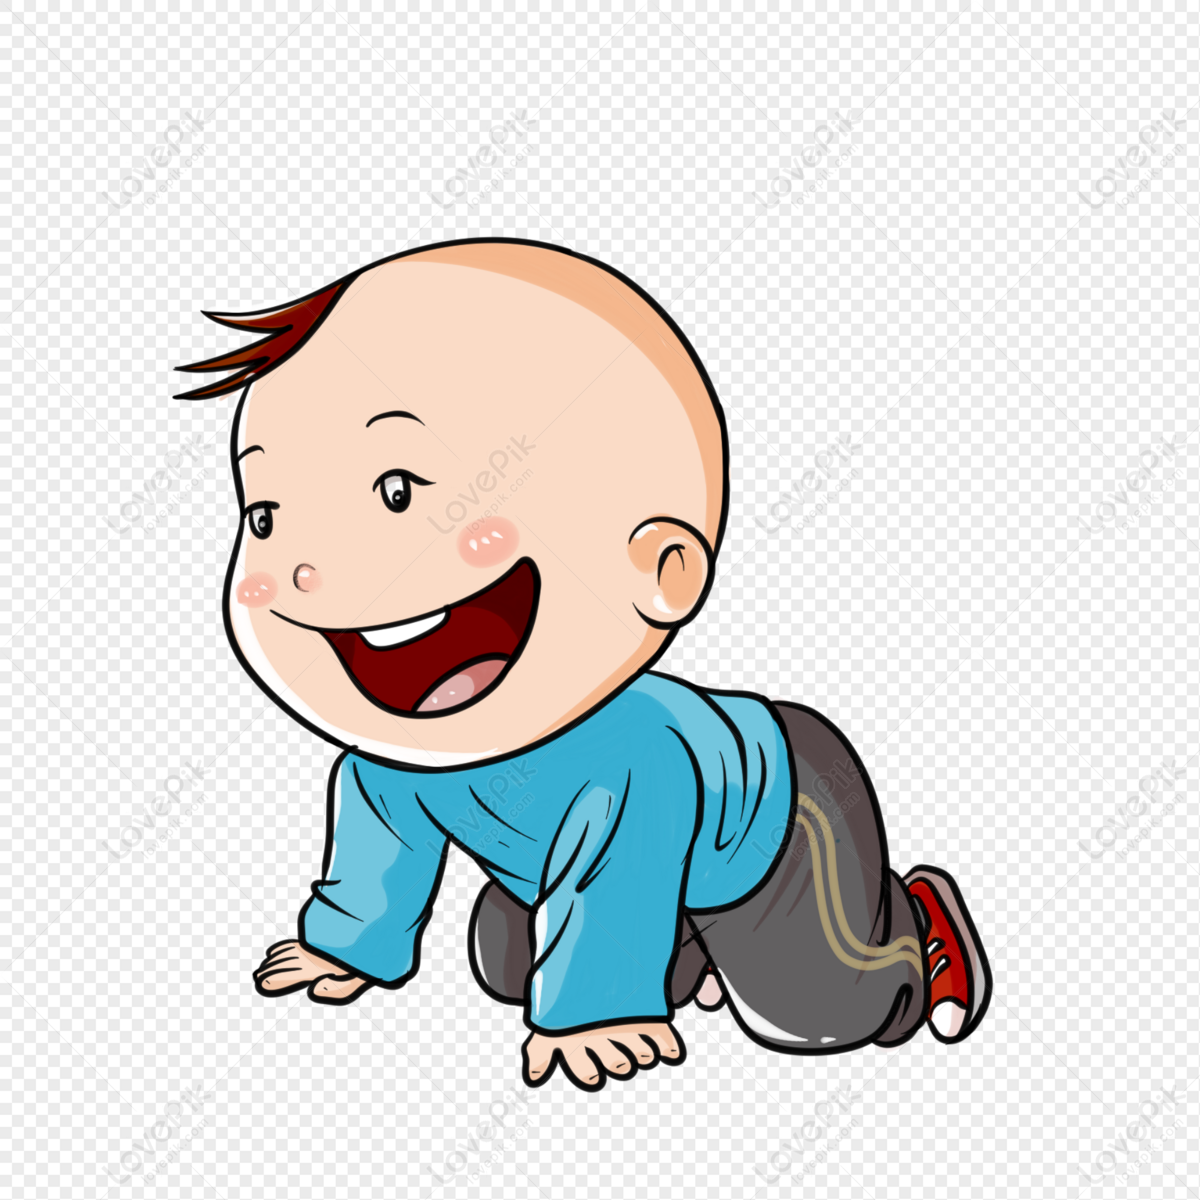 Learning To Crawl Baby PNG Hd Transparent Image And Clipart Image For Free  Download - Lovepik | 401550164